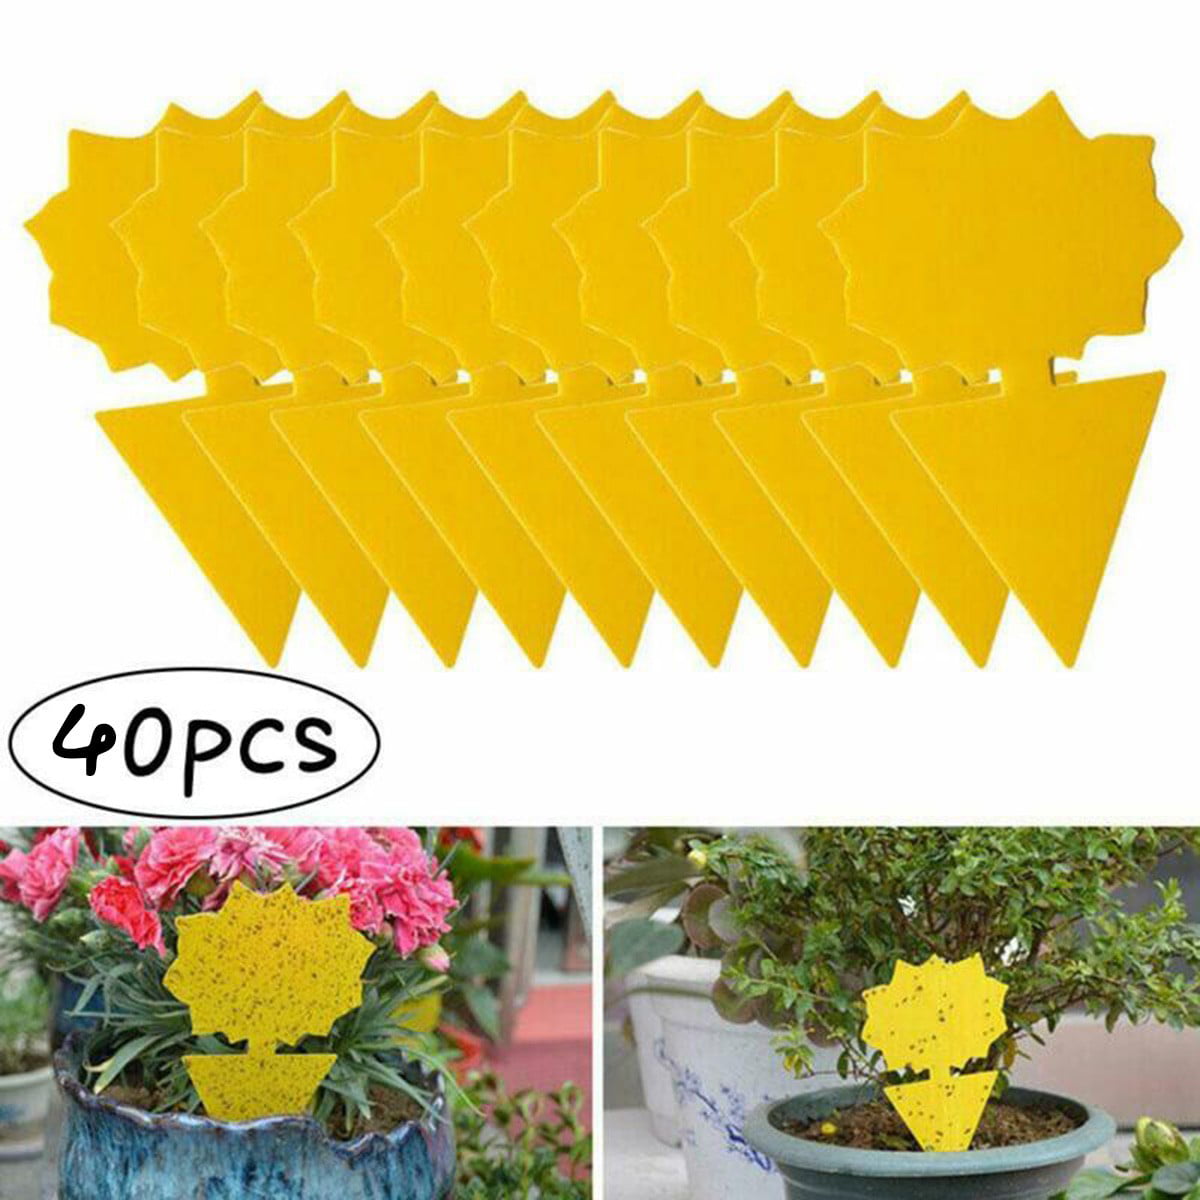 50 Pcs Sticky-Fly-Trap Paper Yellow Traps Fruit Flies Insect Glue Catcher Tool 